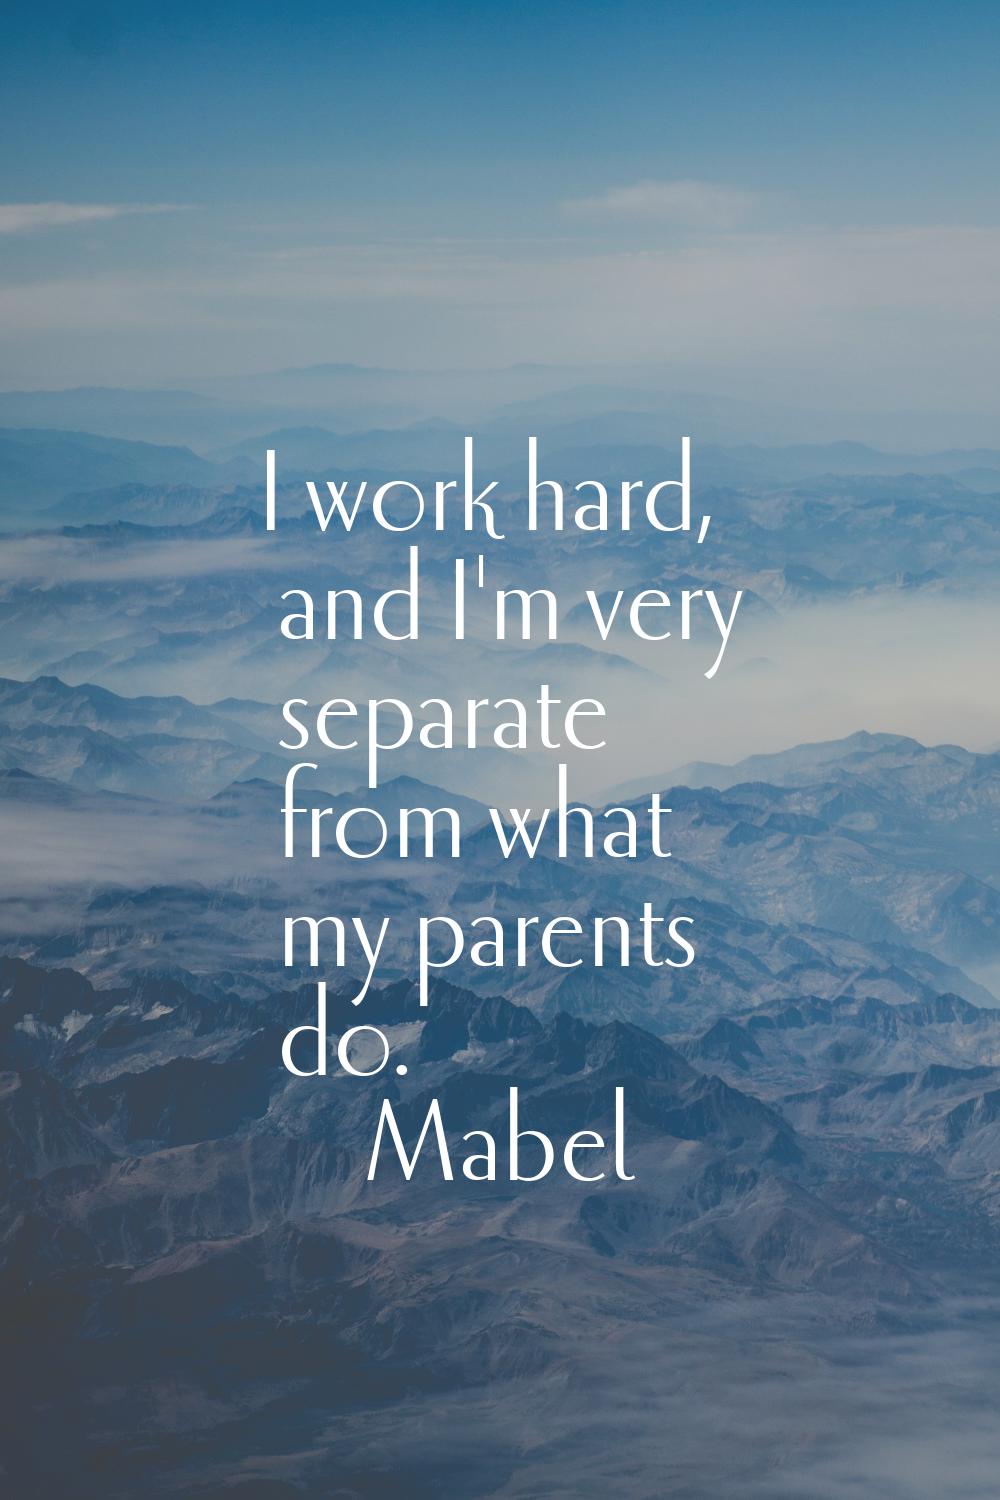 I work hard, and I'm very separate from what my parents do.